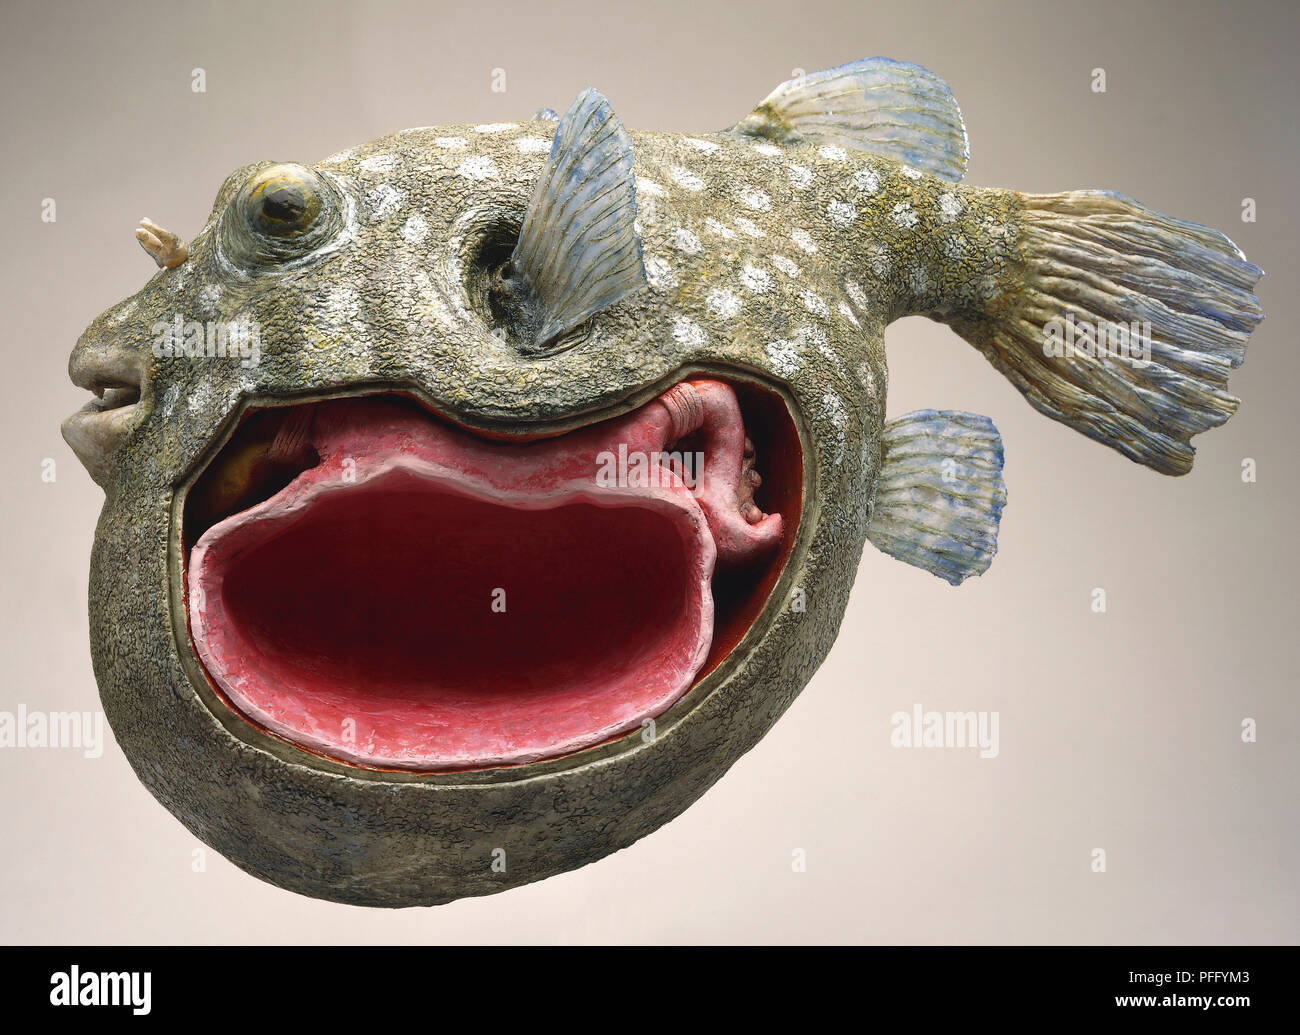 Side view of cross-section model of Puffer Fish with mottled skin  camouflage and sharp teeth, cross-section of stomach showing deadly toxic  liver, ovary and intestines Stock Photo - Alamy